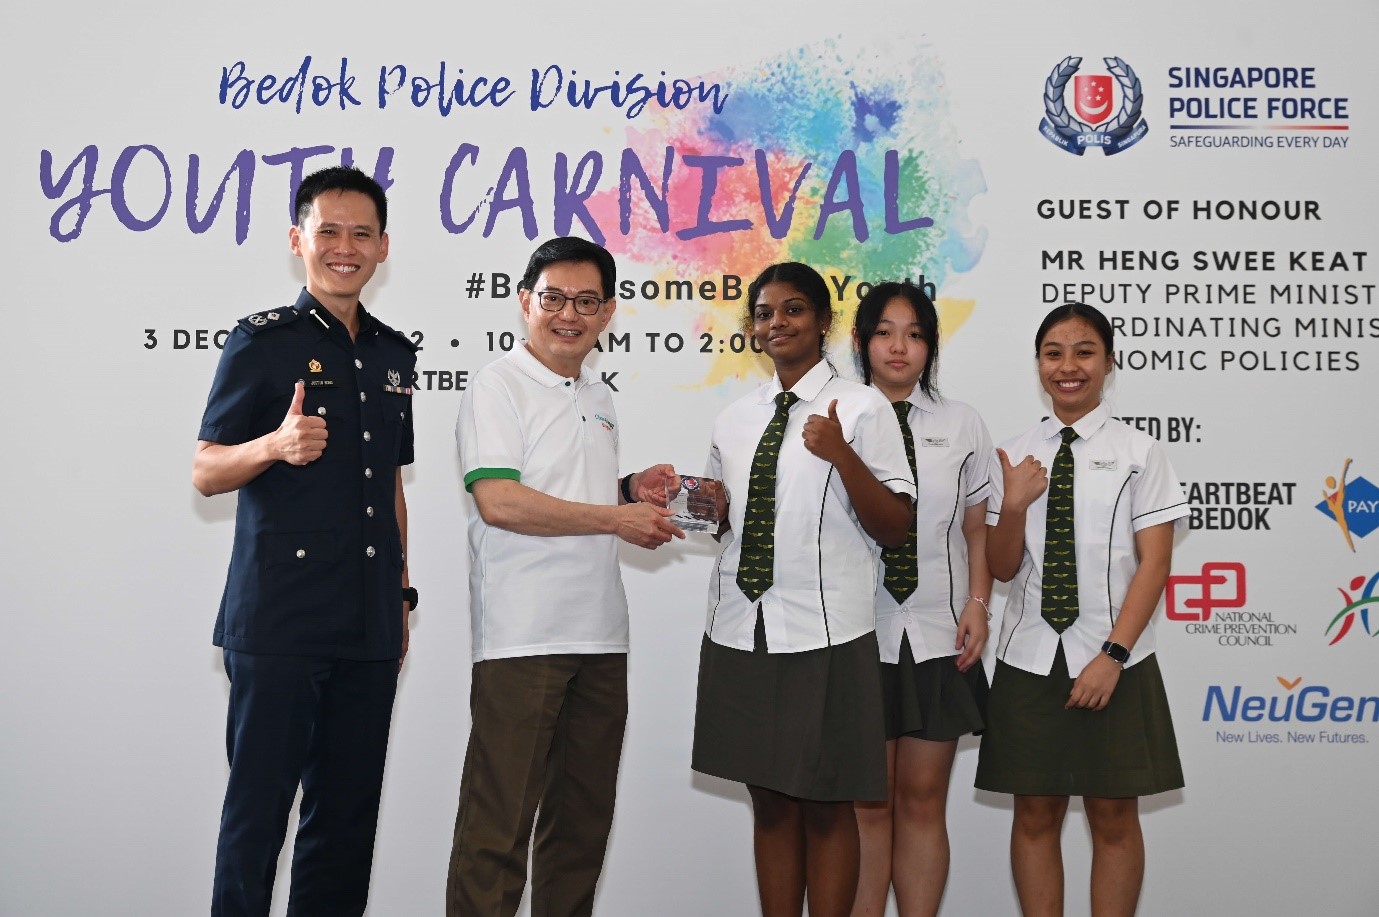 20221208_bedok_police_division_youth_carnival_2022_6